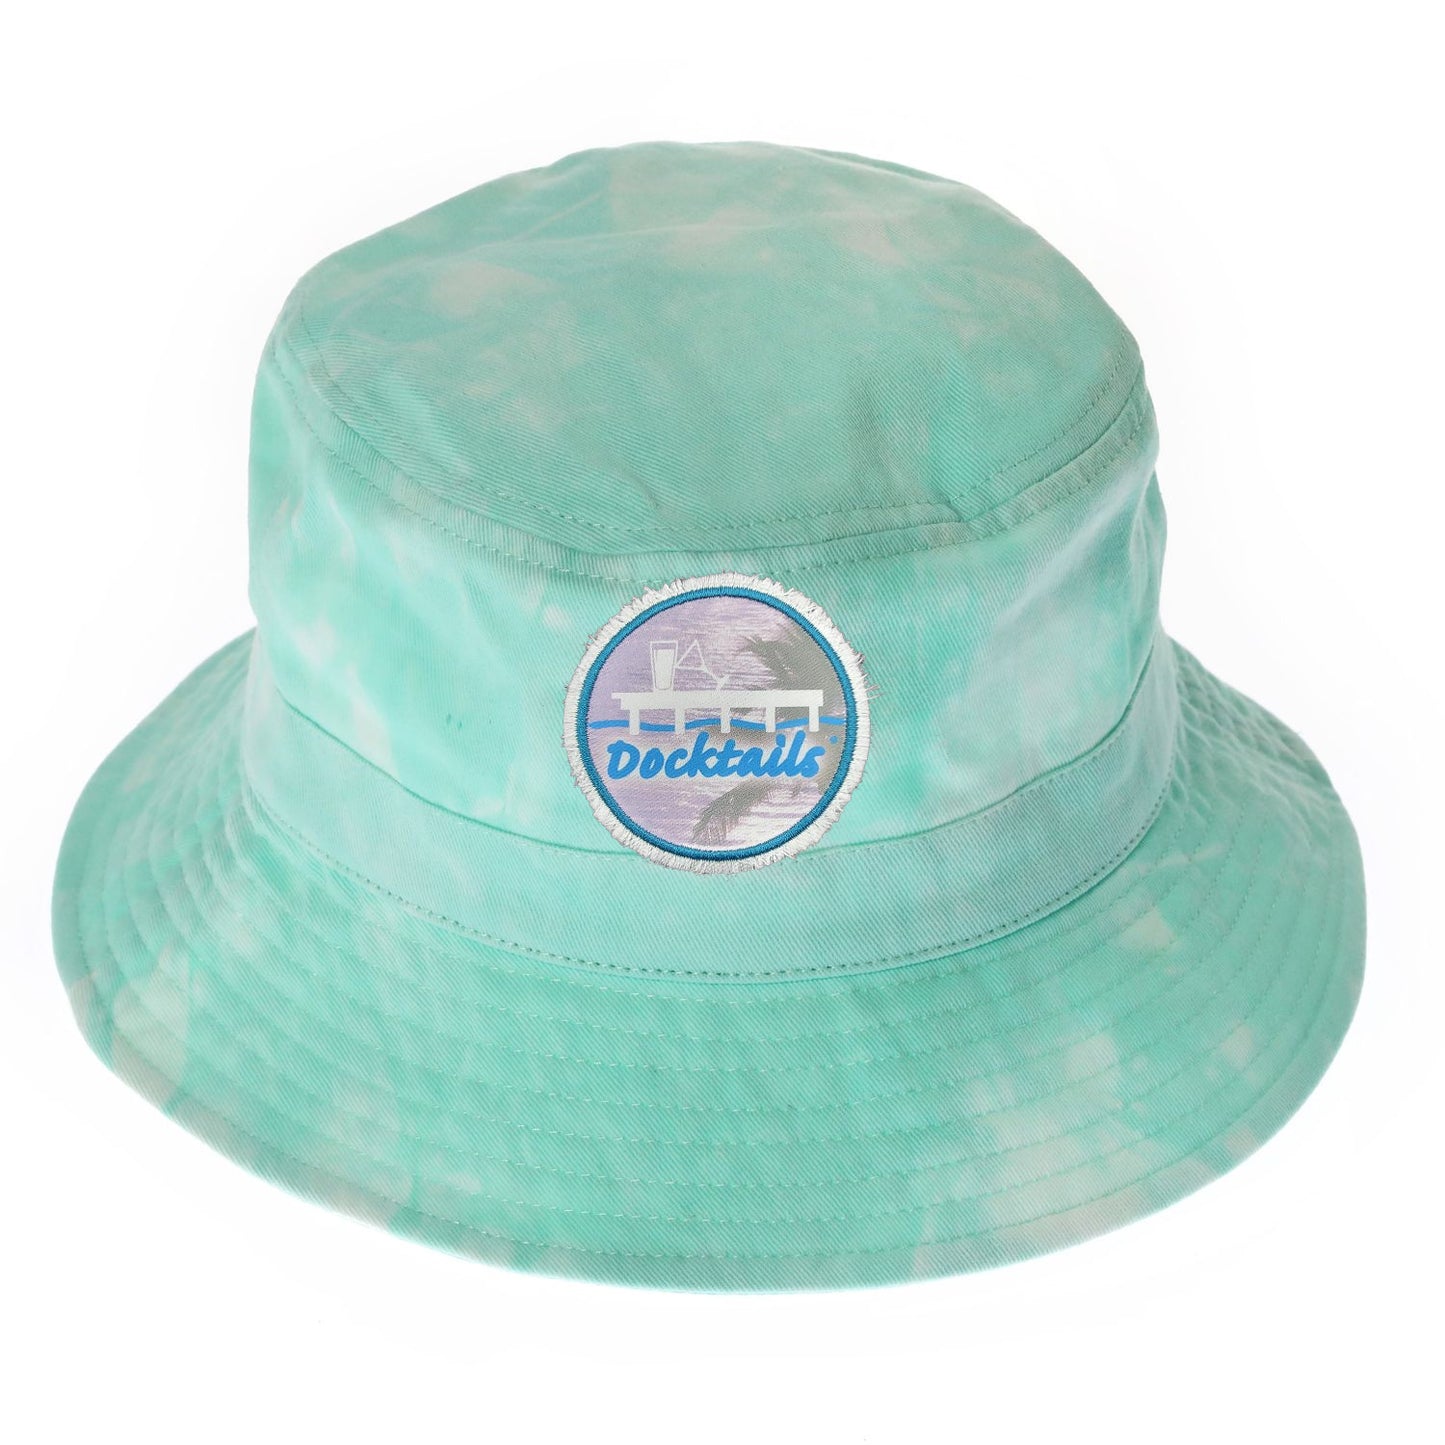 Docktails Beach Bucket Hat in green tie dye; crushable and packable, 100% cotton